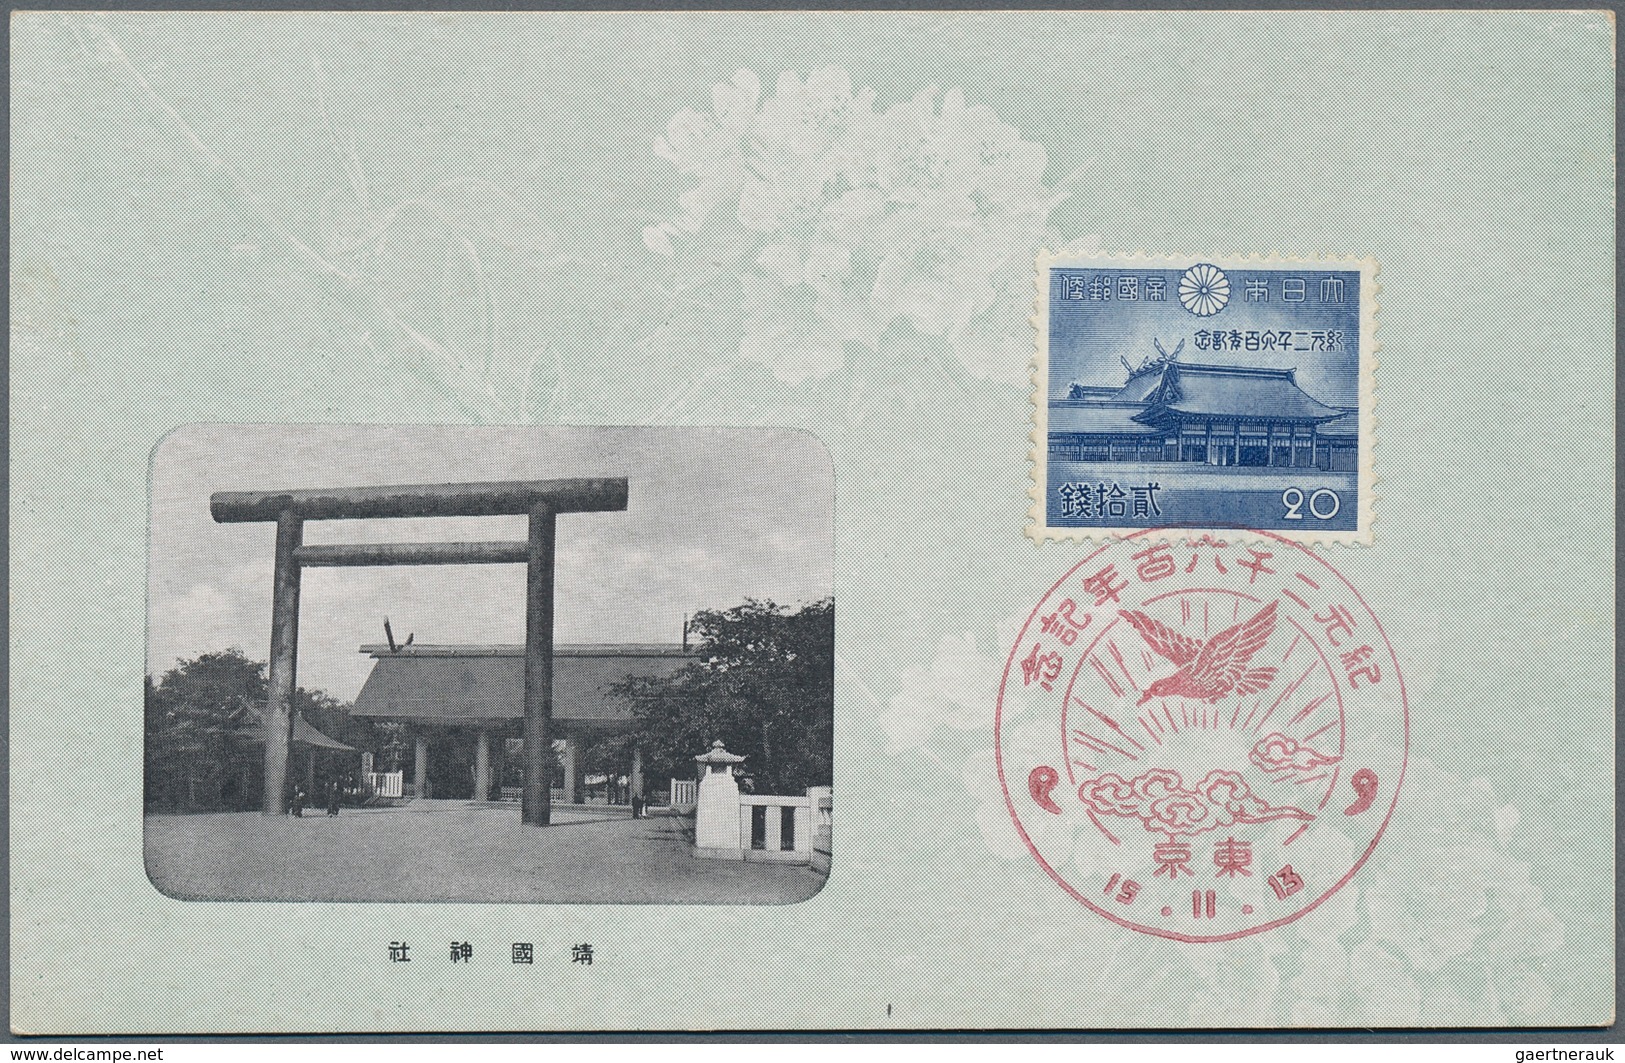 29463 Japan: 1899/2002 (ca.), covers (ca. 137) and ppc (39, mint/used), often used to Switzerland. Also 20